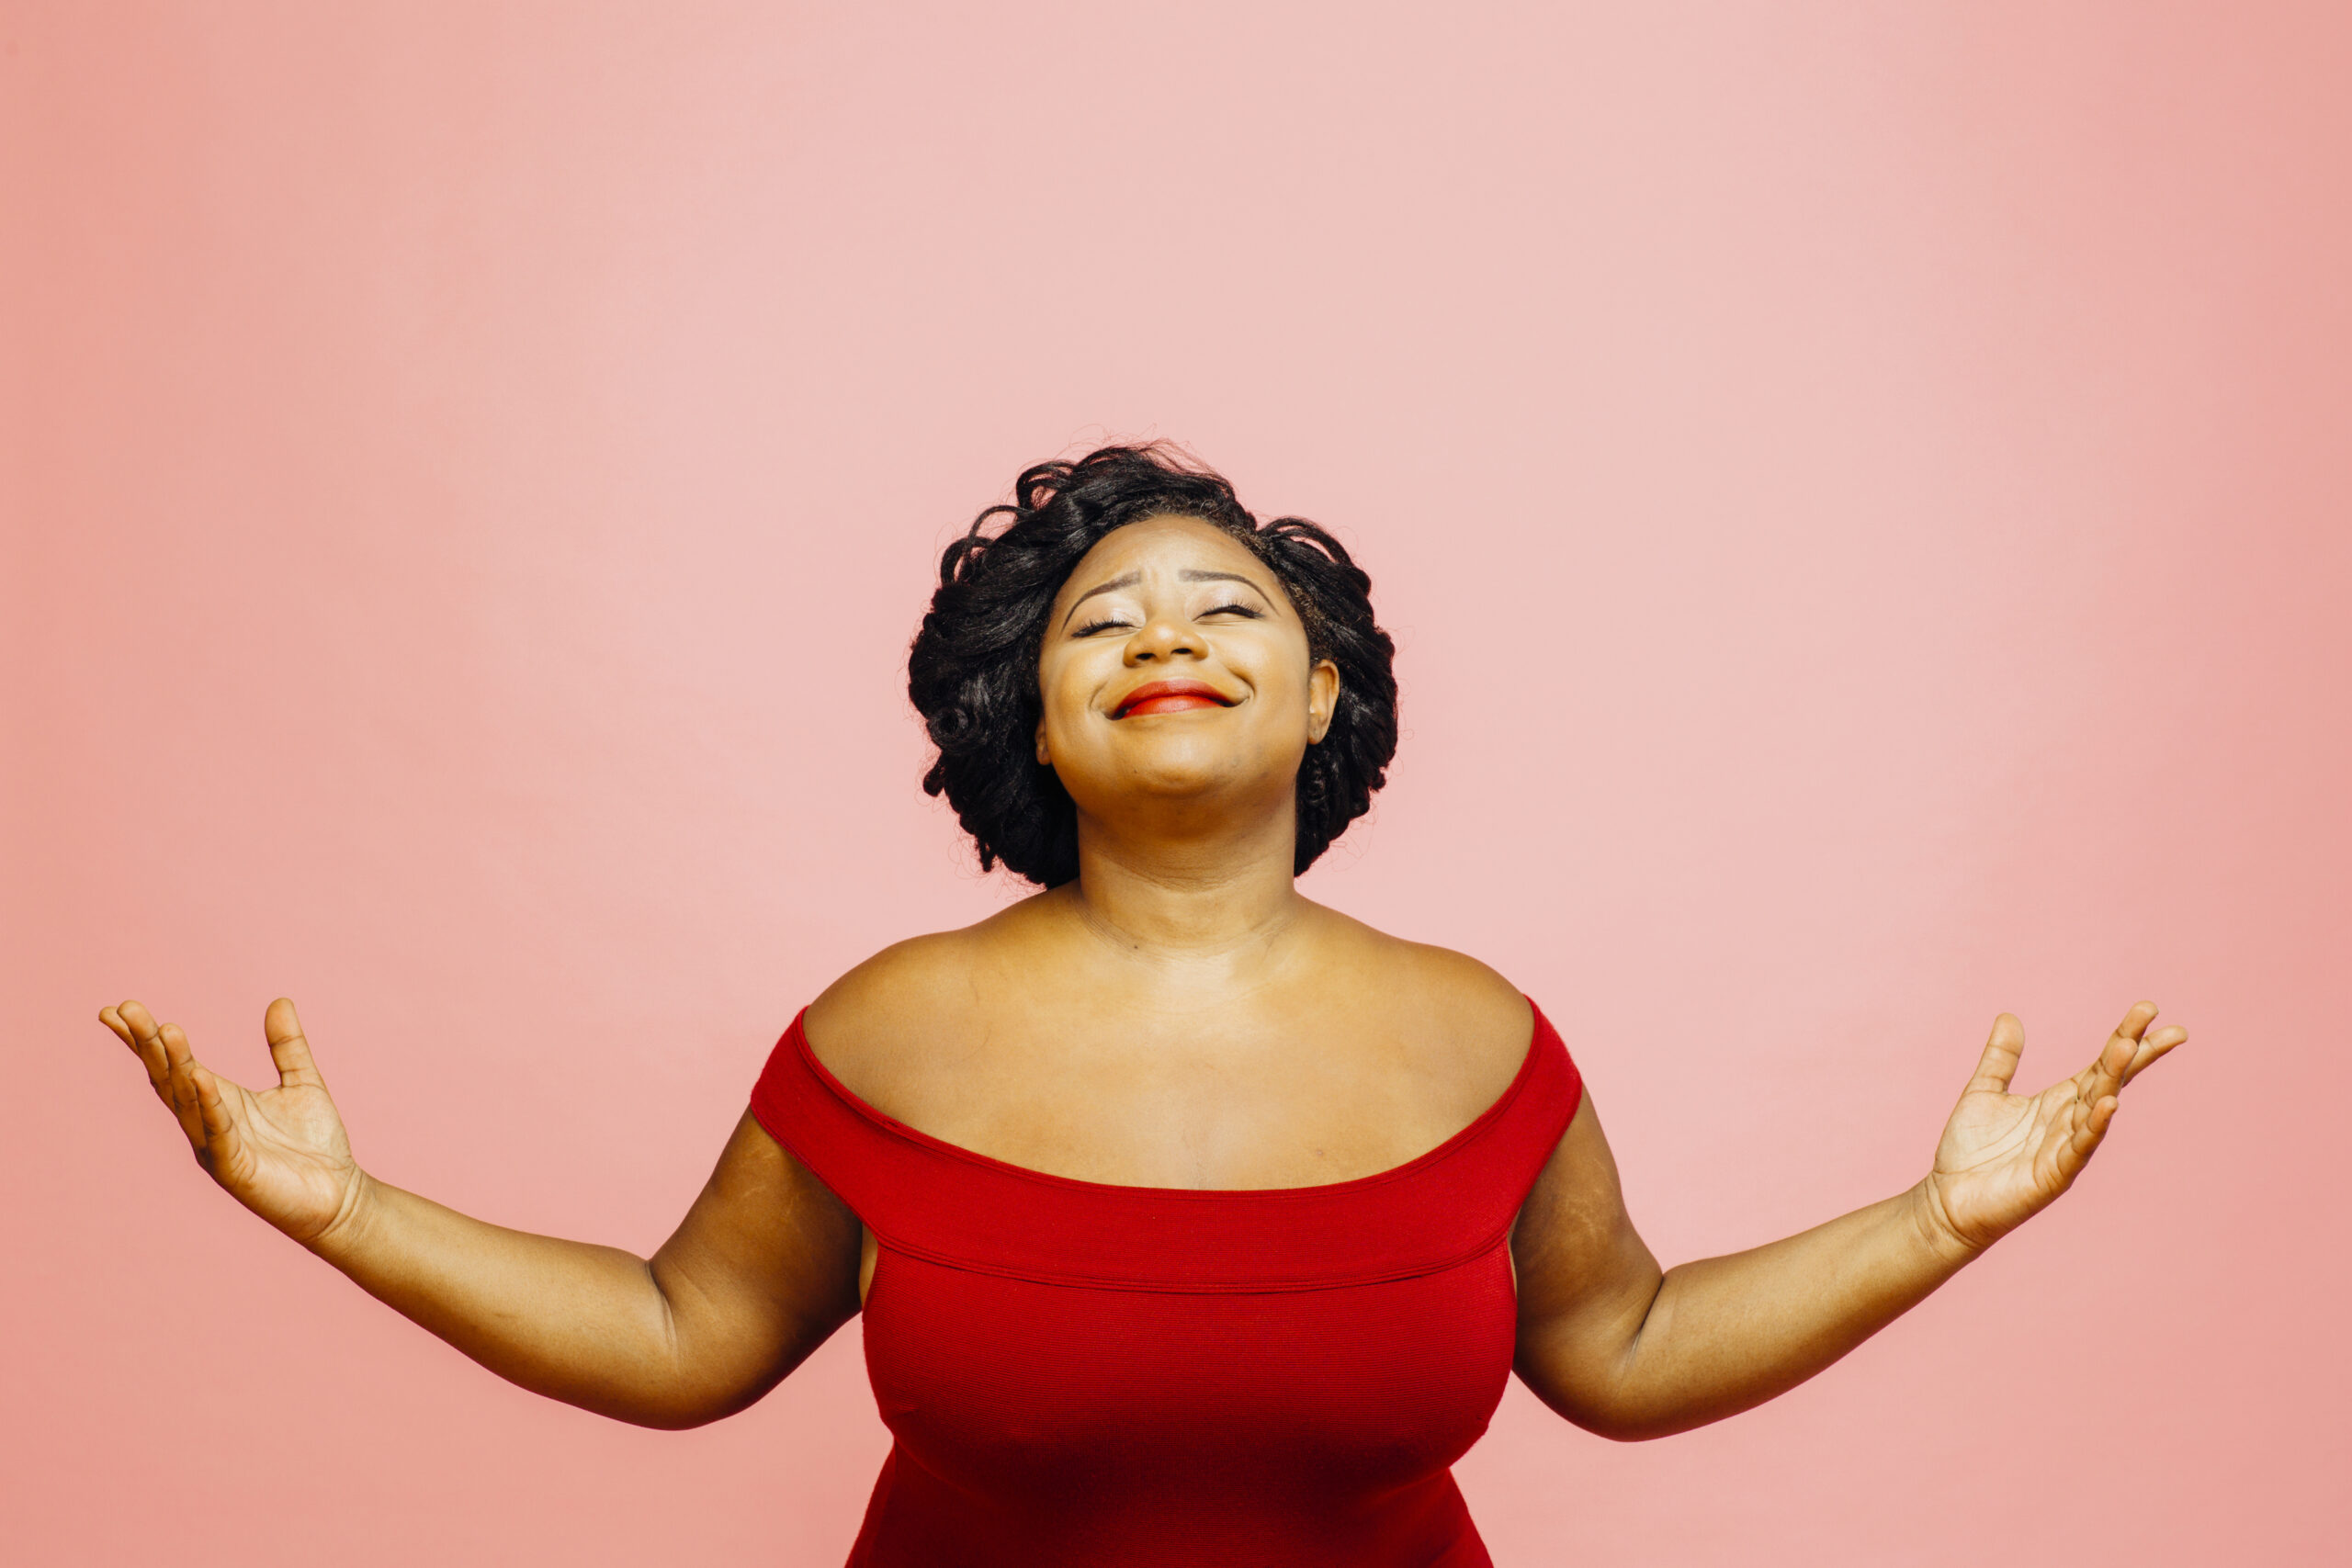 Plus size woman wearing red dress and feeling confident after undergoing bariatric surgery.